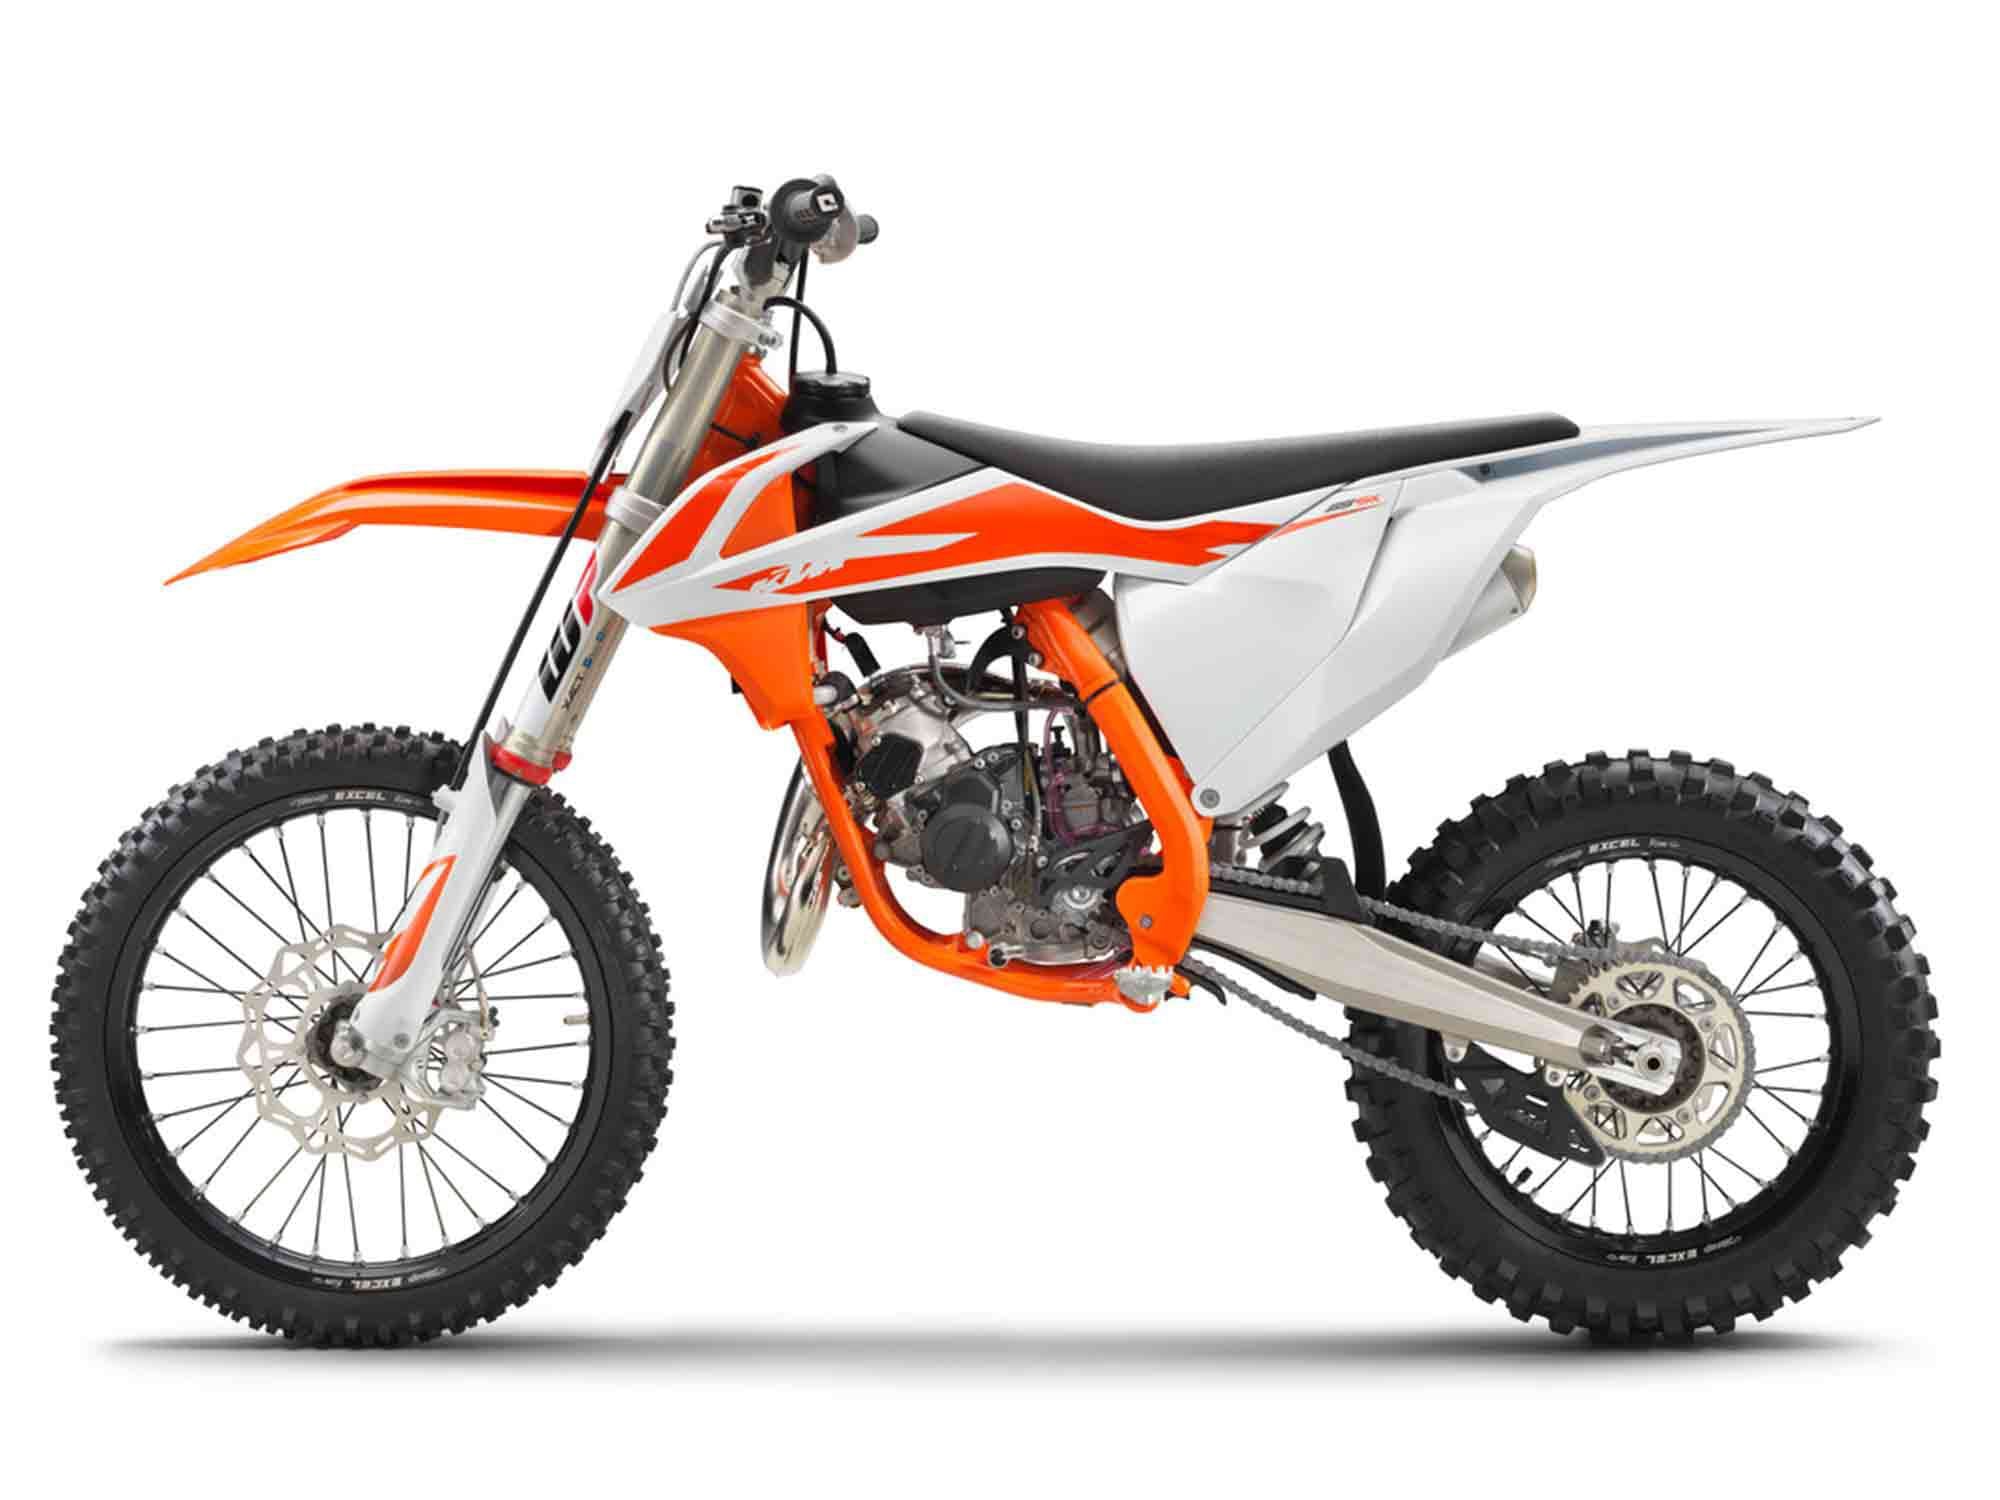 KTM 85 SX Buyer's Guide: Specs, | Cycle World